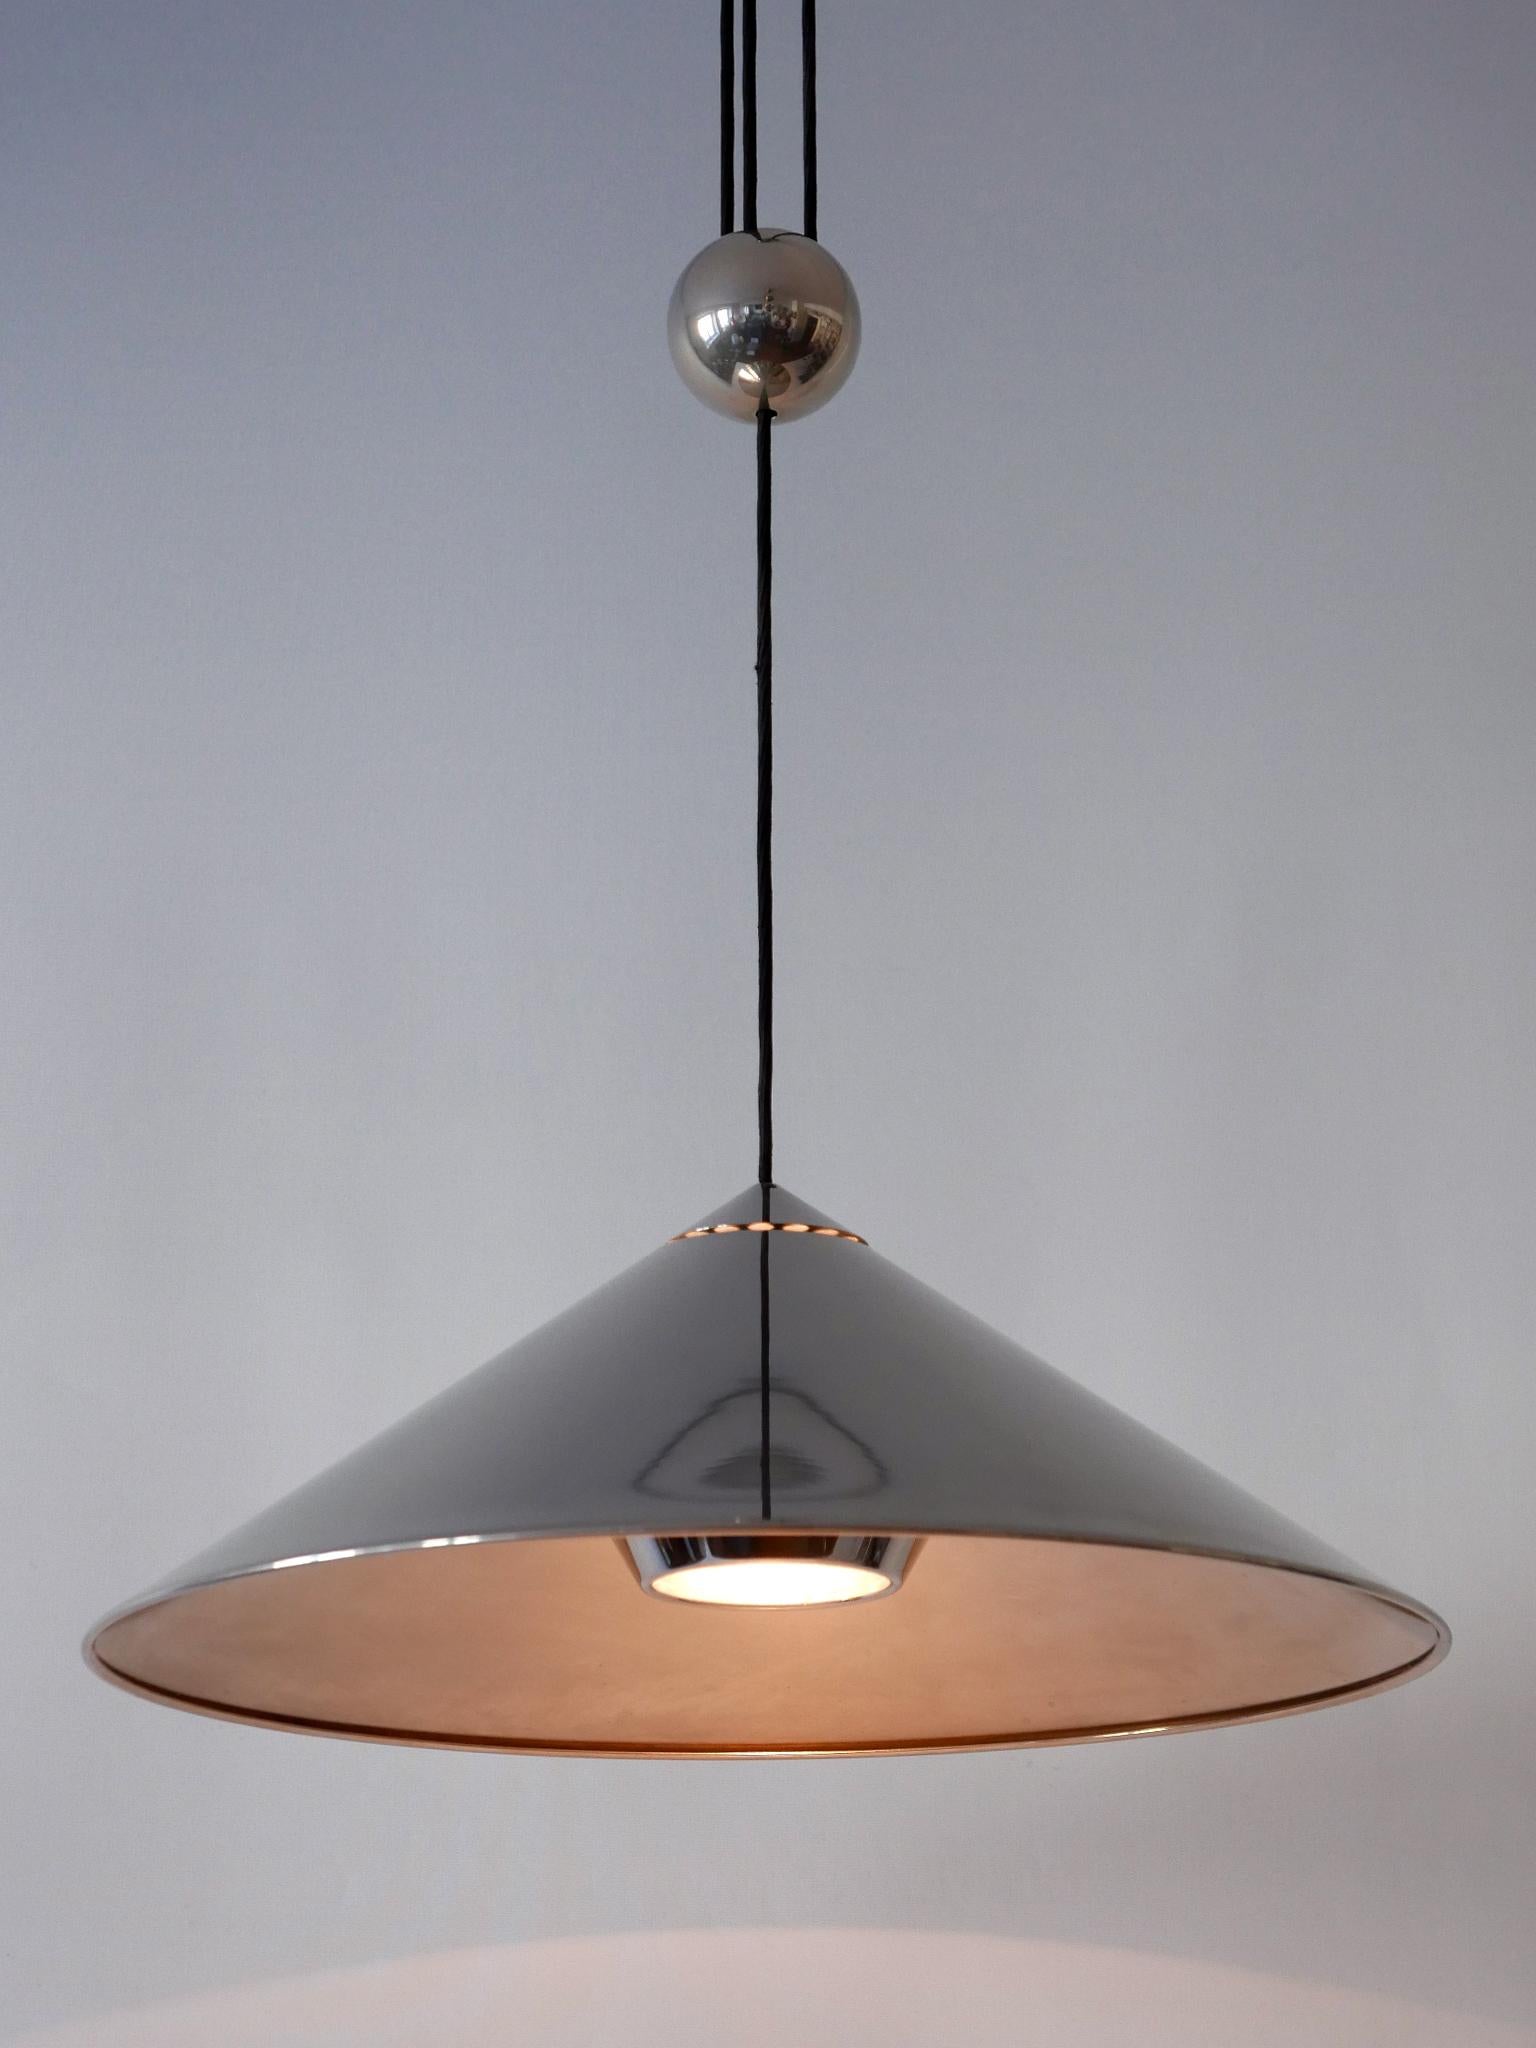 Elegant Mid-Century Modern adjustable counterweight pendant lamp 'Keos'. Designed and manufactured by Florian Schulz, Germany, 1970s.

Executed in nickel-plated brass, the lamp needs 1 x E27 Edison screw fit bulb, is wired. It runs both on 110 / 230